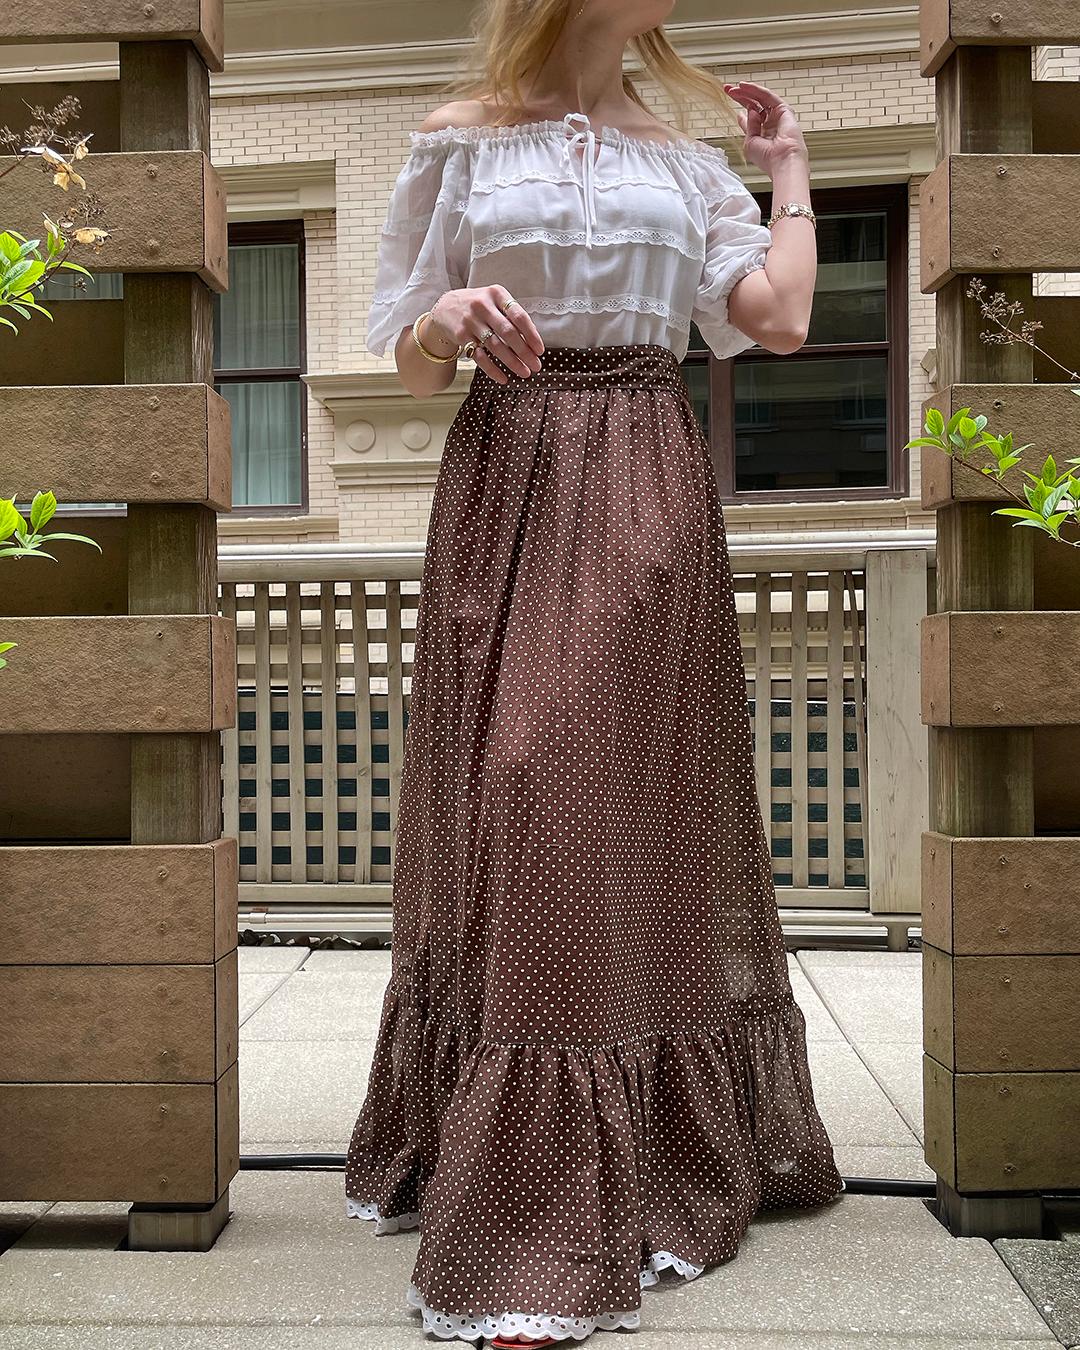 1970s Eyelet Off-The-Shoulder Maxidress with Polka Dot Skirt: I love an off-the-shoulder dress, and this one certainly delivers. It reminds me of the Rive Gauche dresses Yves Saint Laurent was doing in the 1970s— an easy, bohemian glamour! The